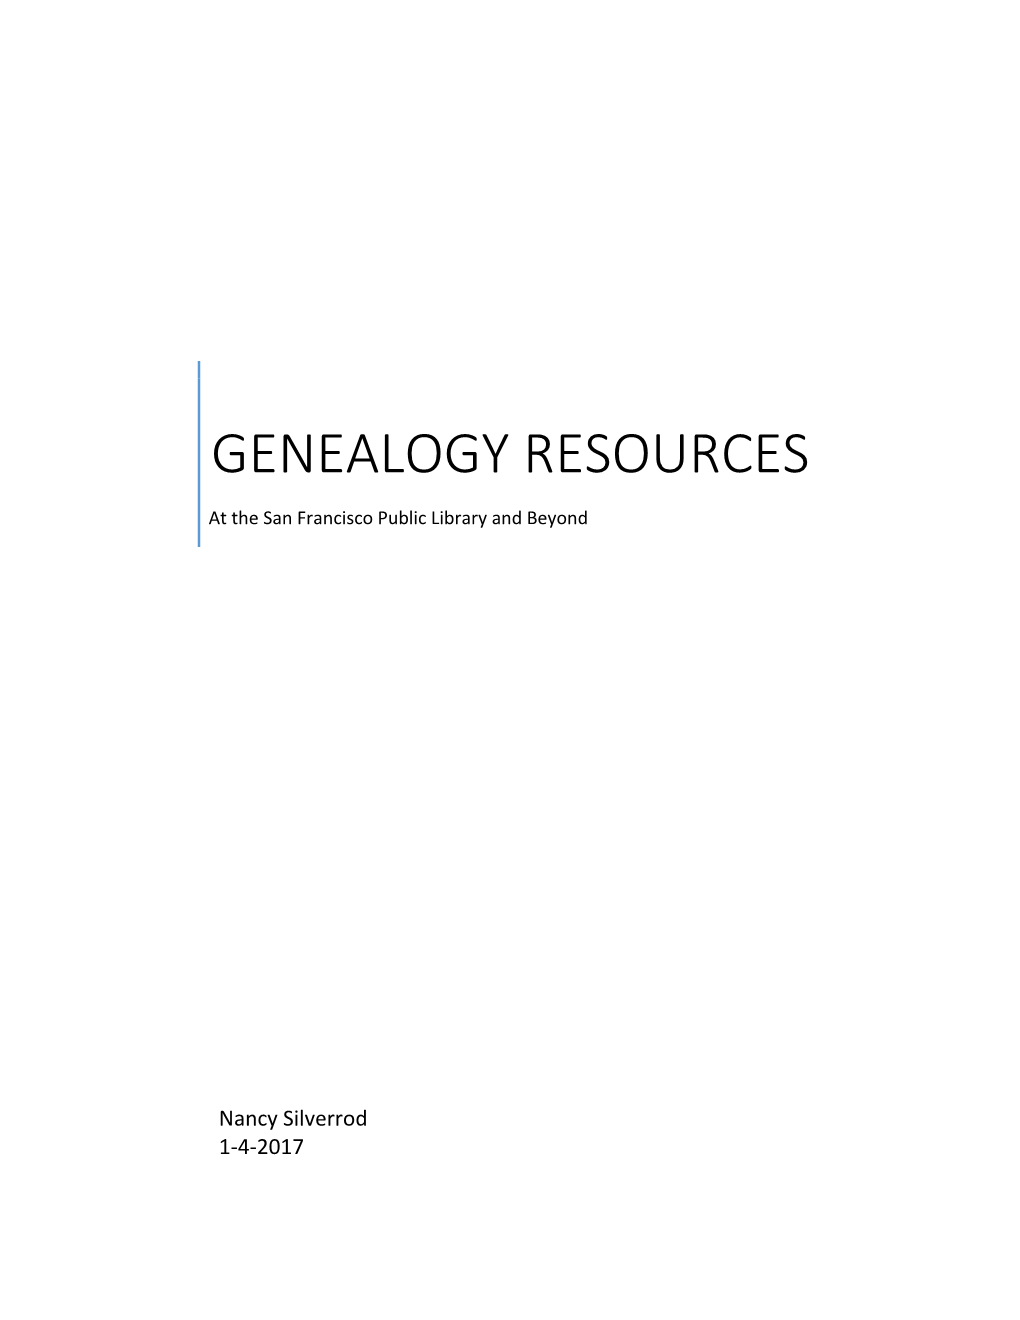 Genealogy Resources at San Francisco Public Library and Beyond